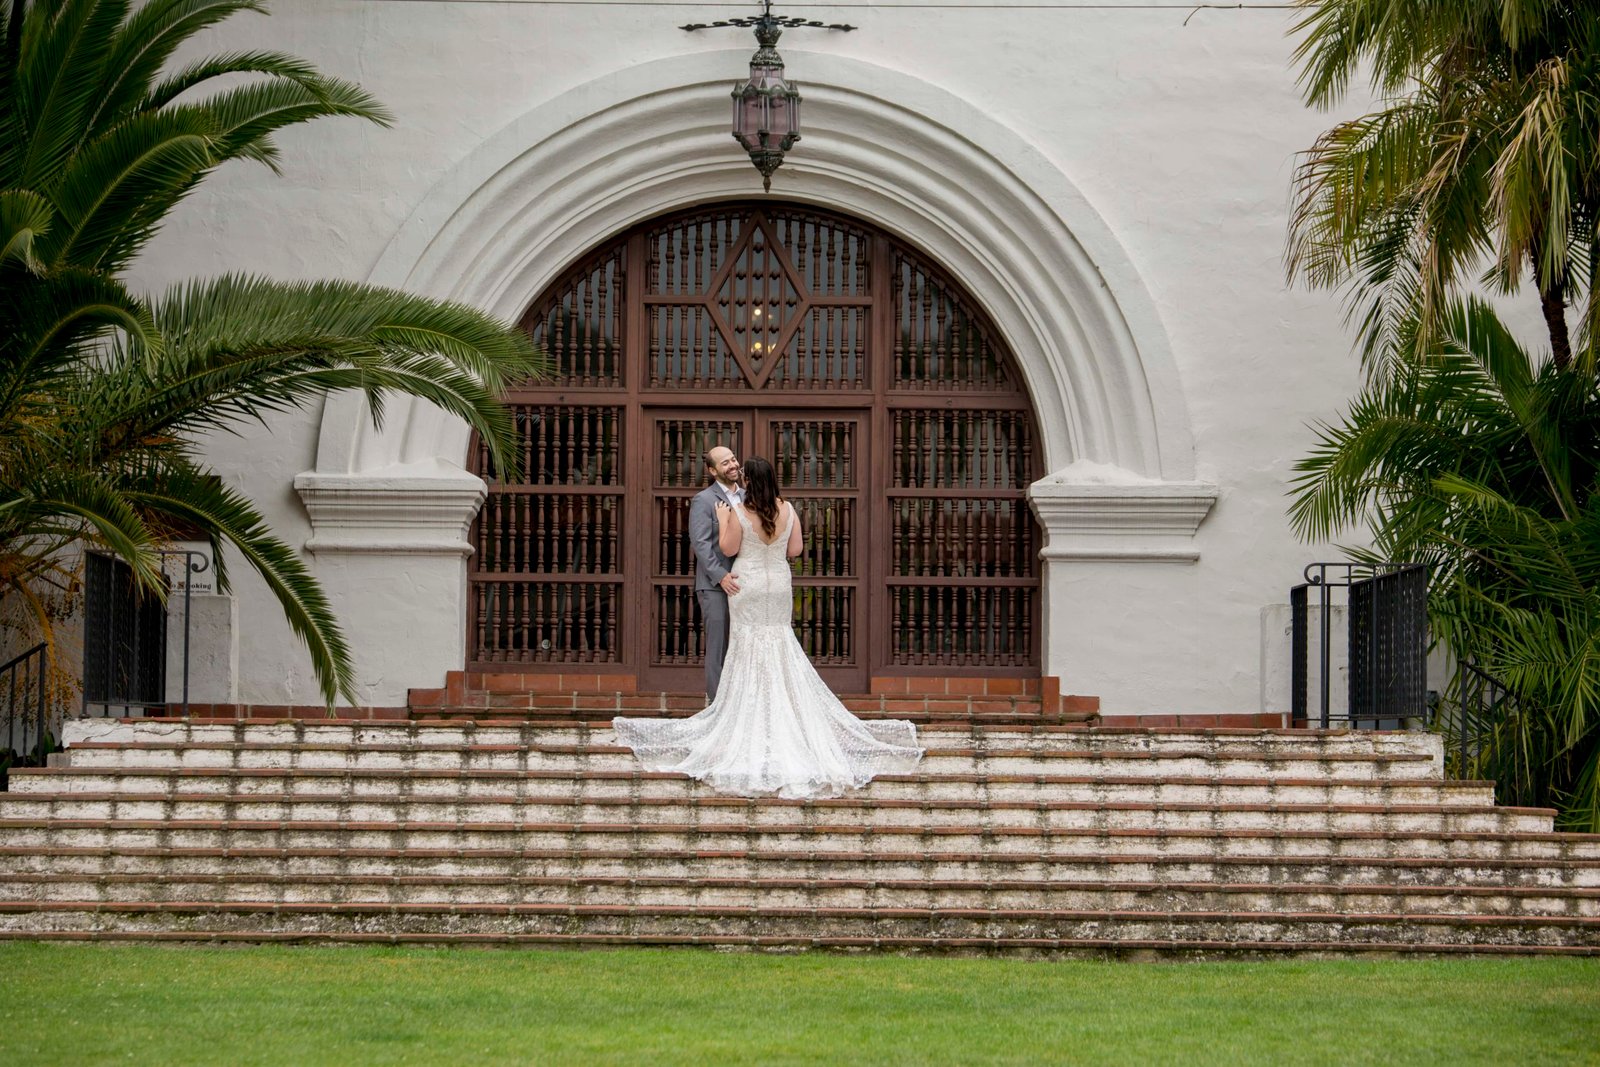 Bride and groom stand with the bride's dress cascading down the steps at the Santa Barbara Courthouse